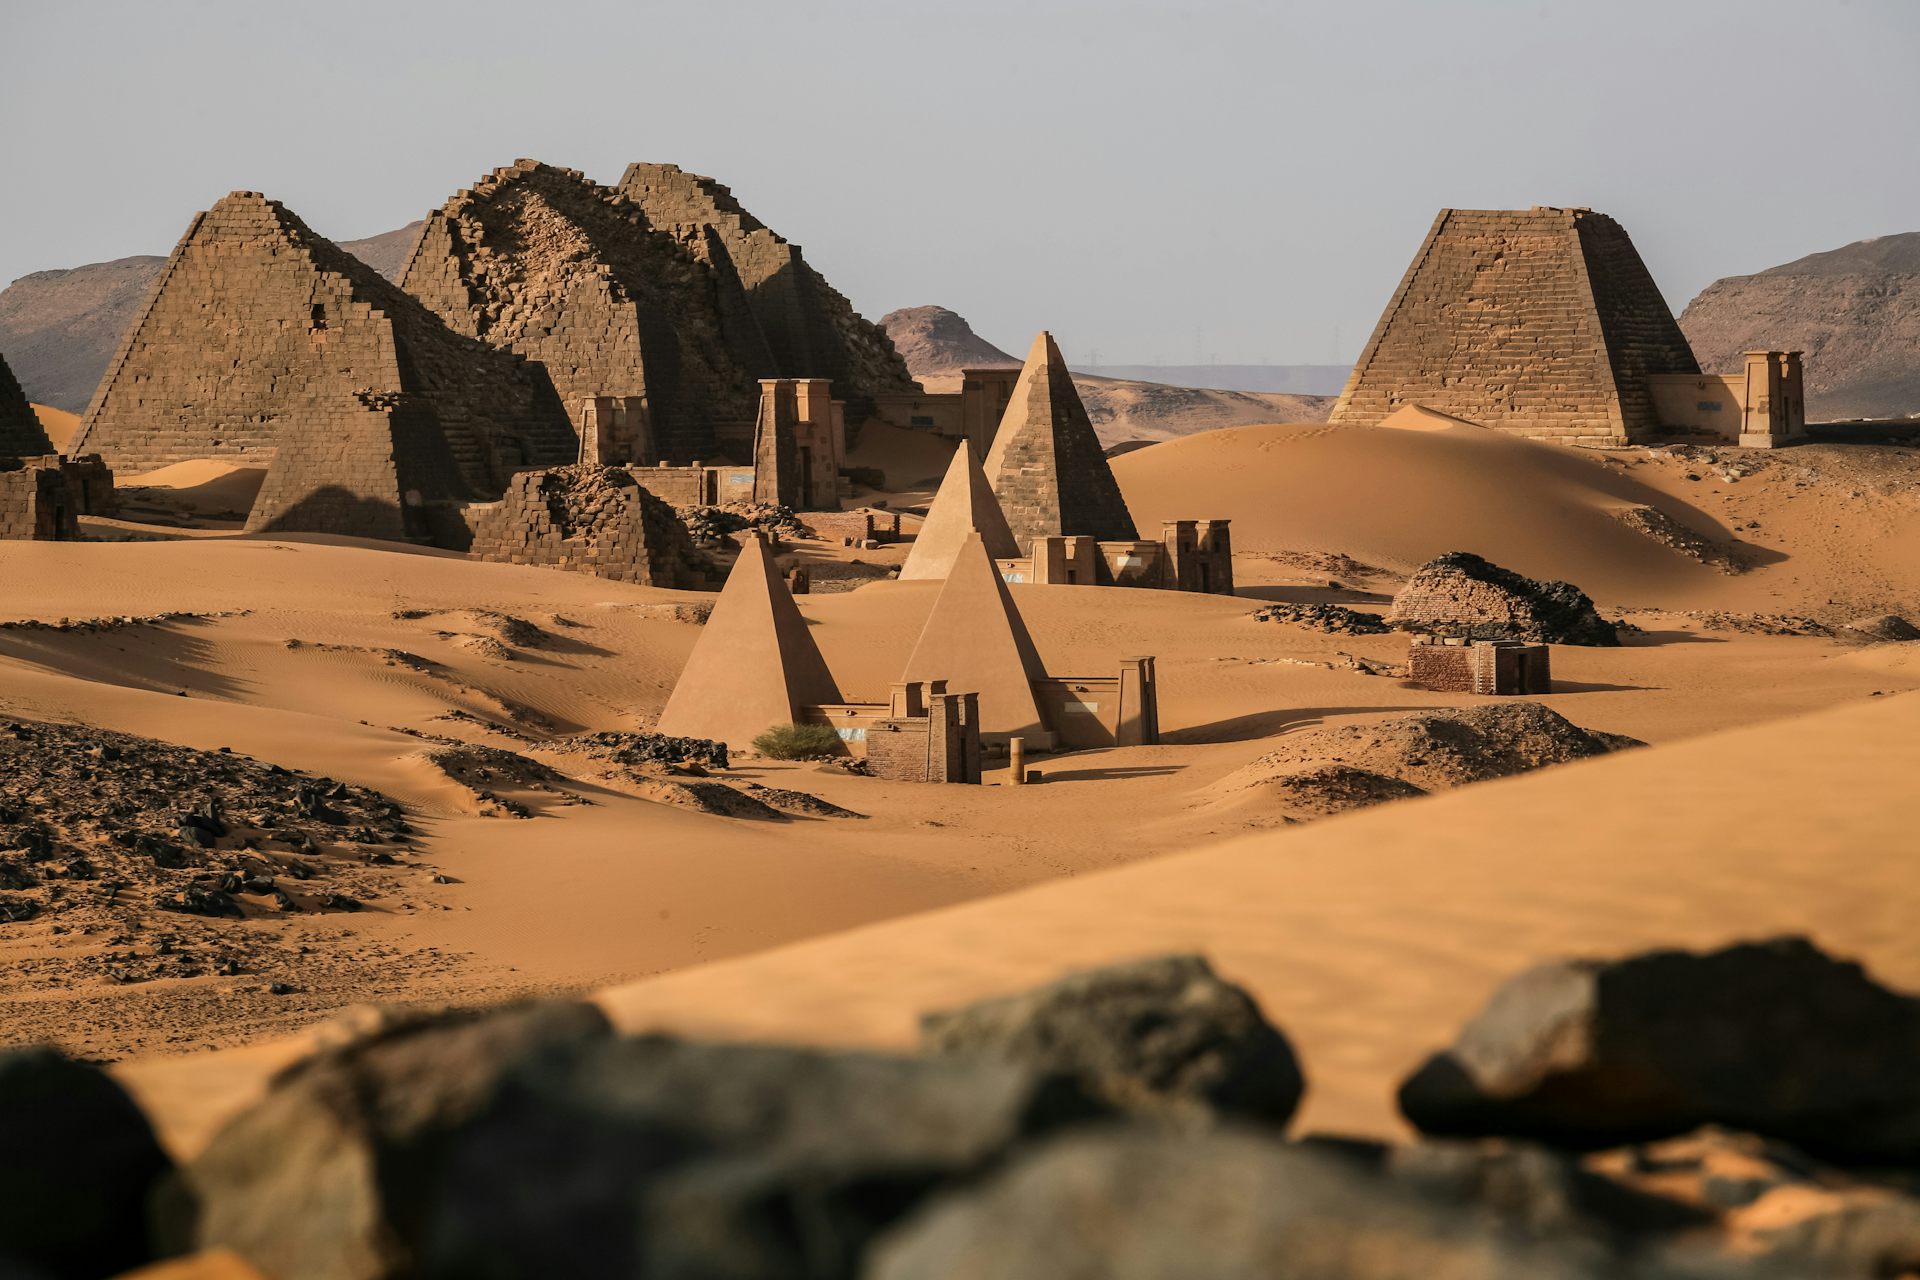 Sudan's 'forgotten' pyramids risk being buried by shifting sand dunes